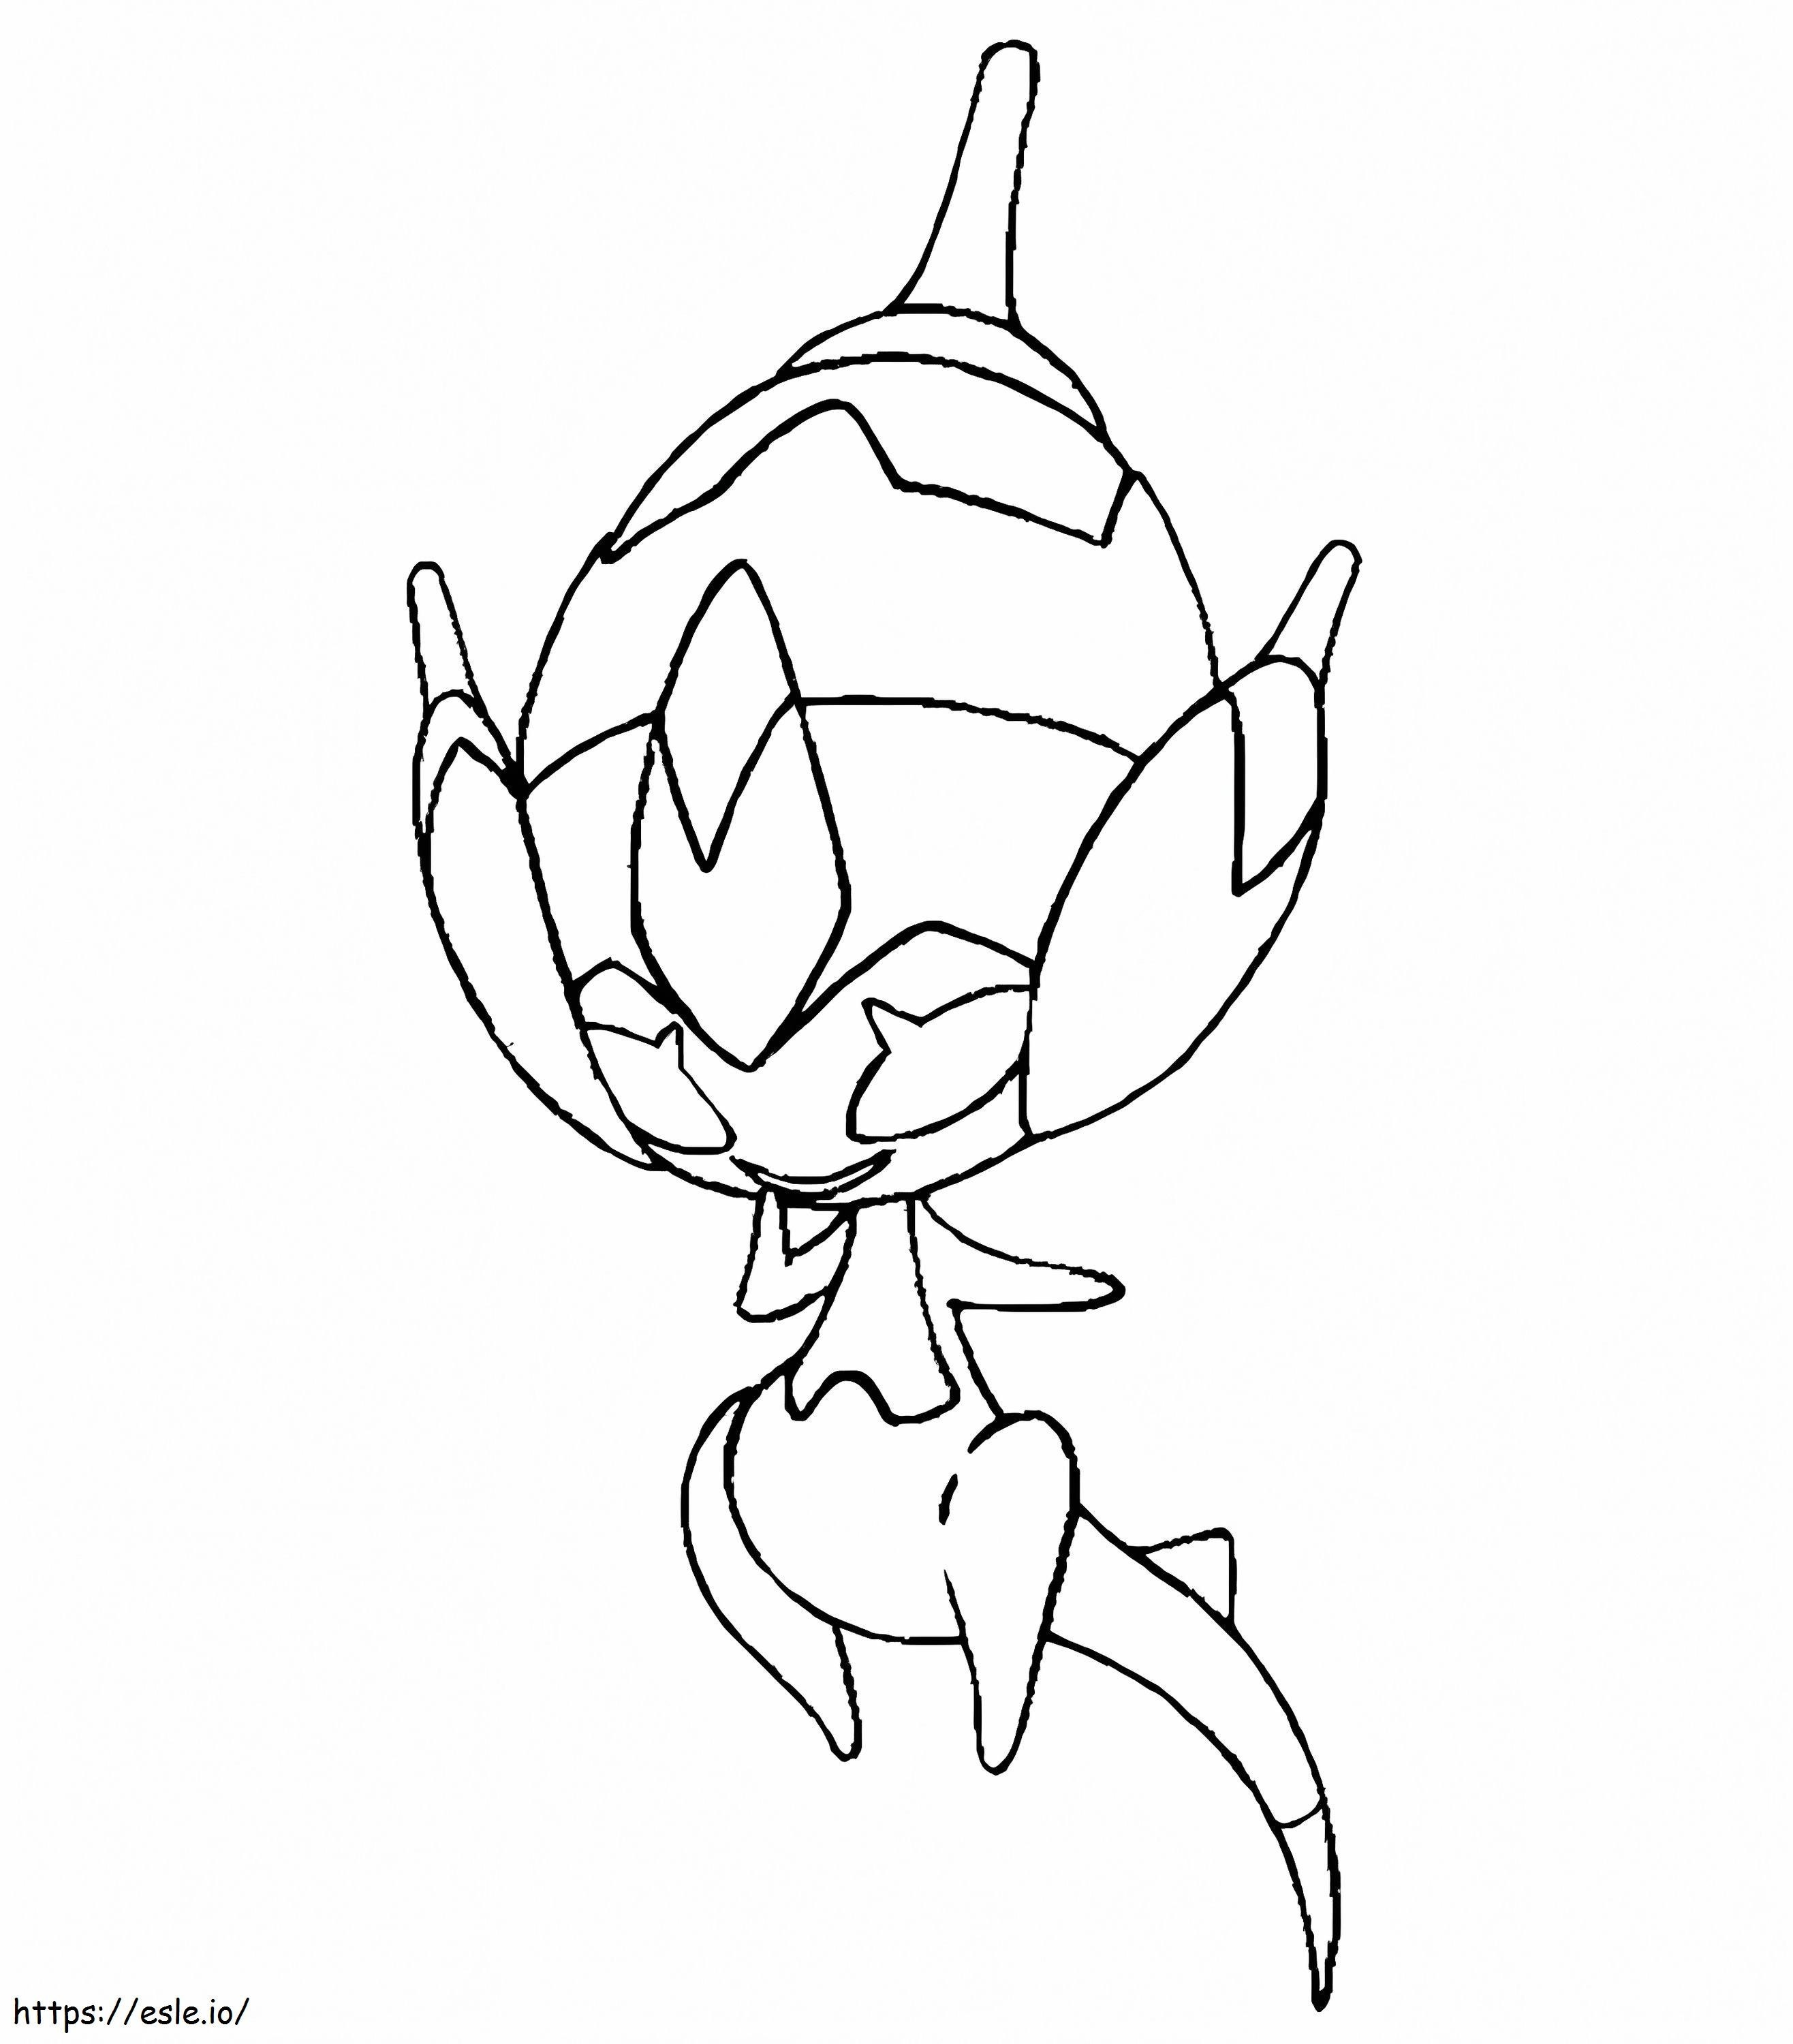 Poipole Pokemon coloring page